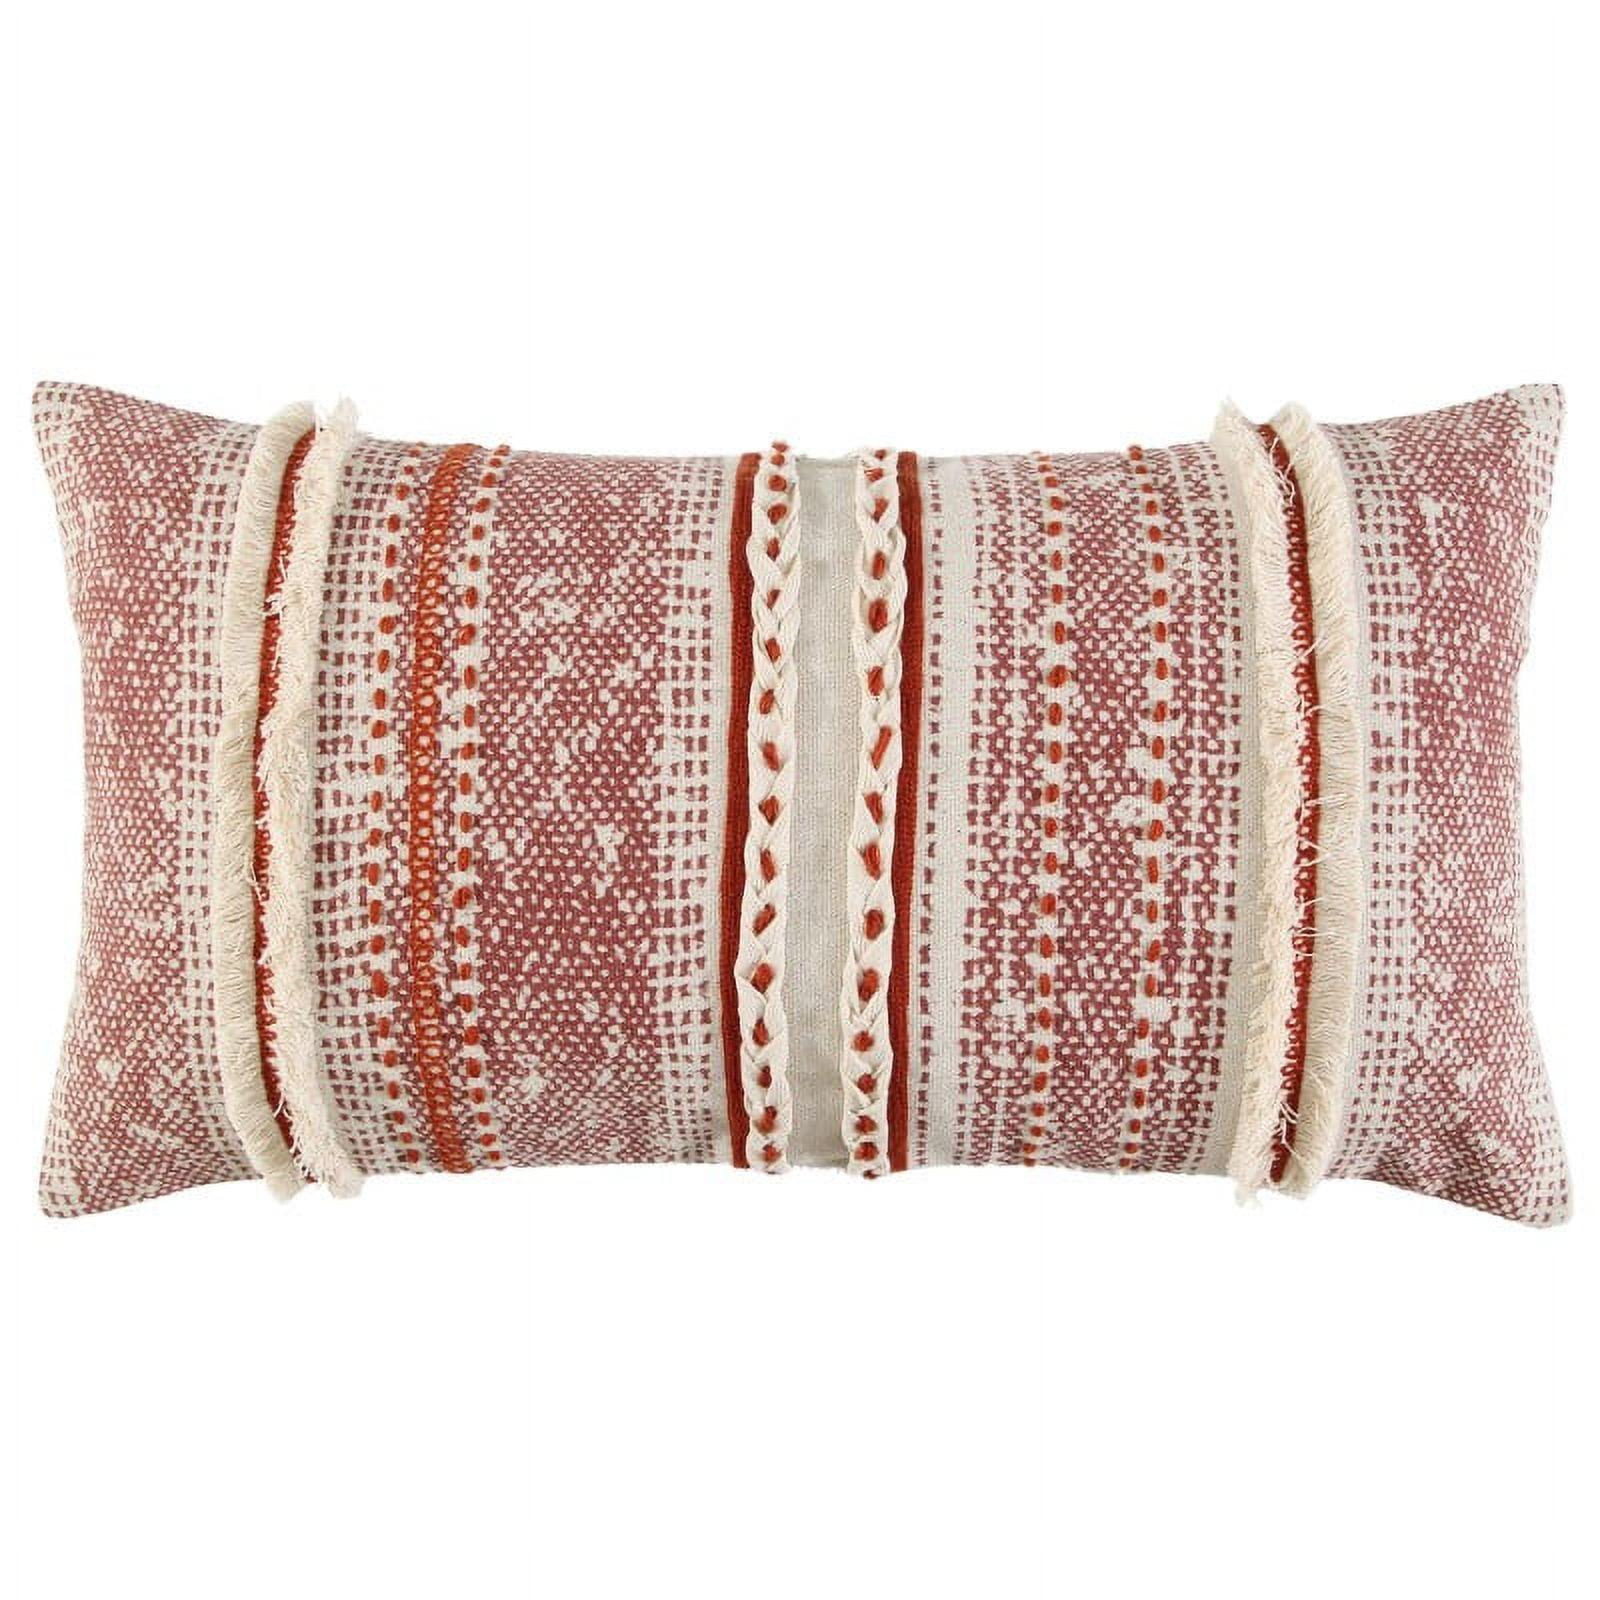 Rustic Rust and Ivory Cotton Embroidered Lumbar Pillow 11"x17"